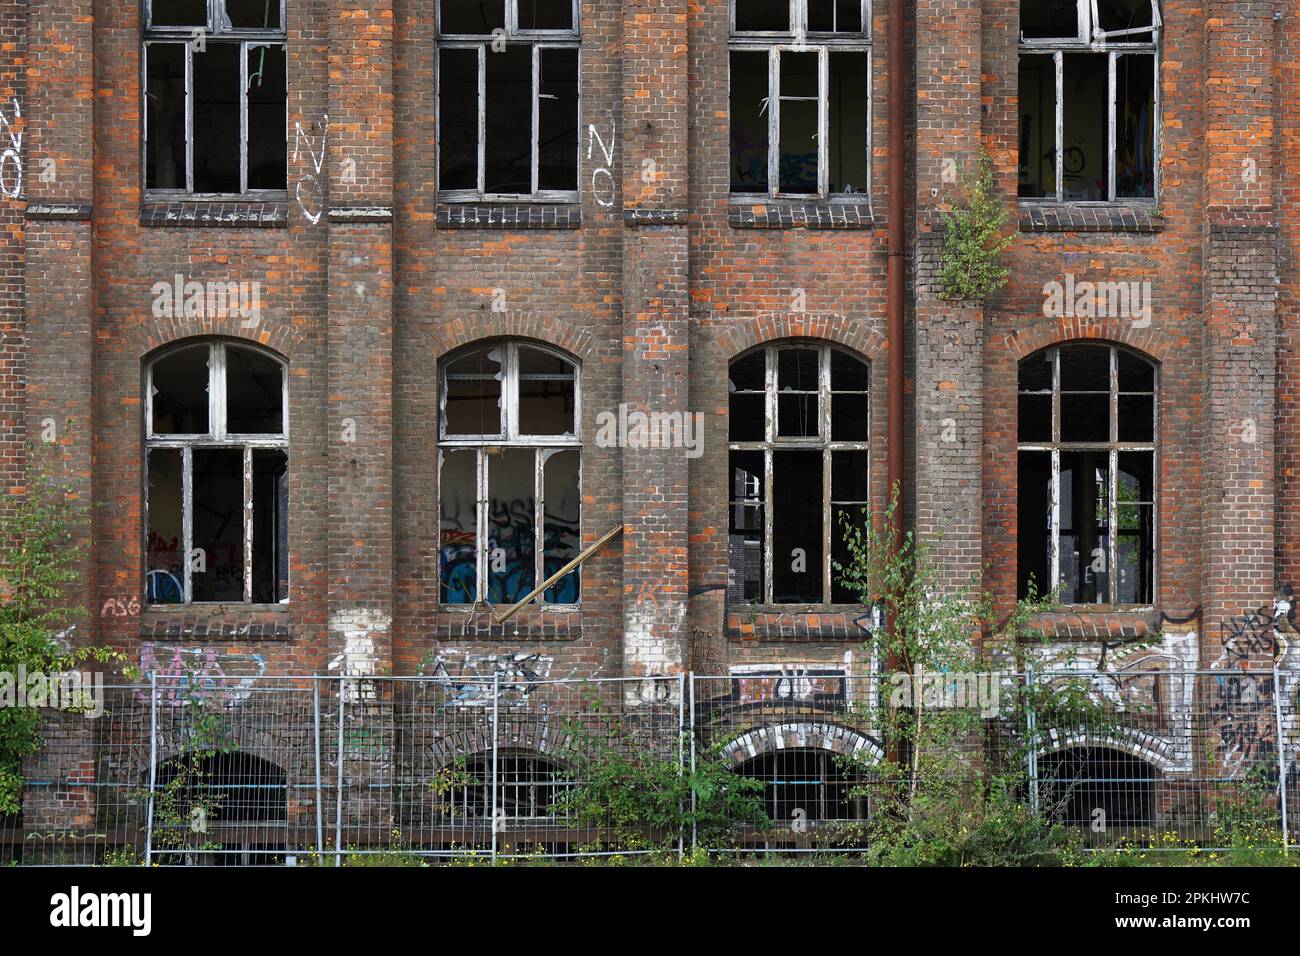 dilapidated red brick facade with graffiti and smashed windows Stock Photo